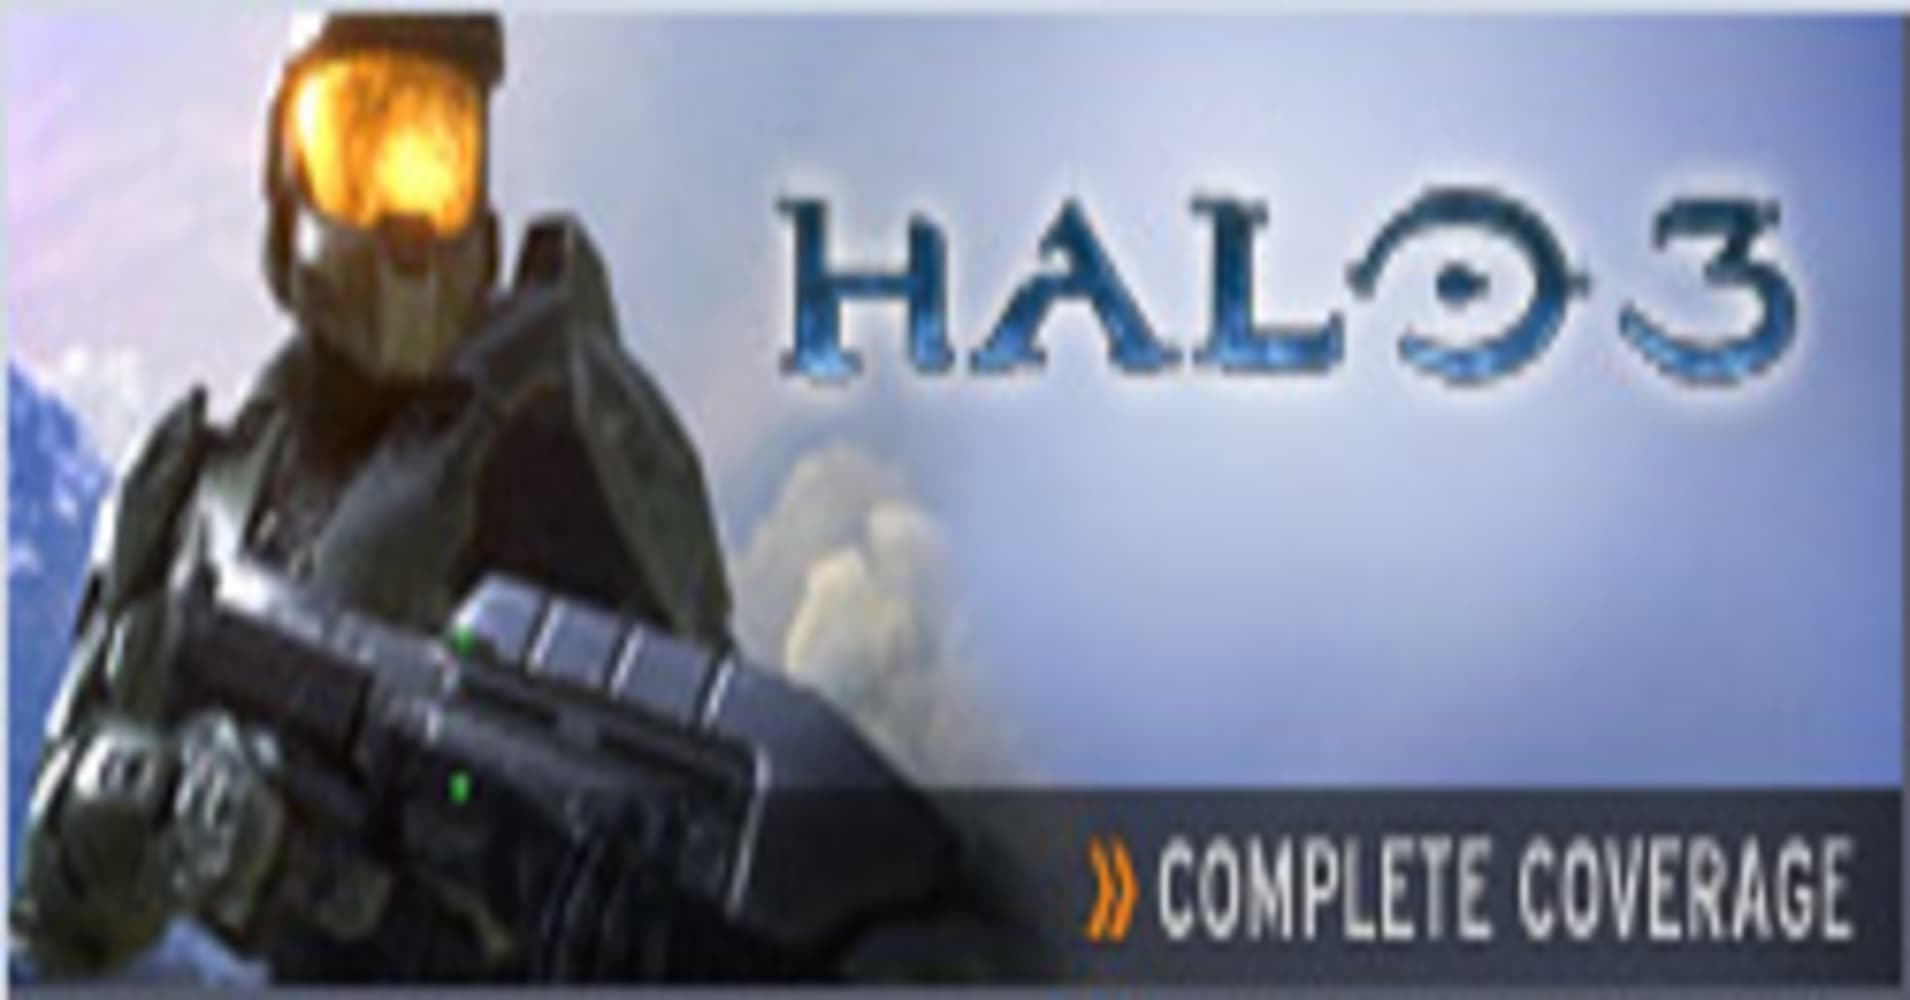 halo game sales